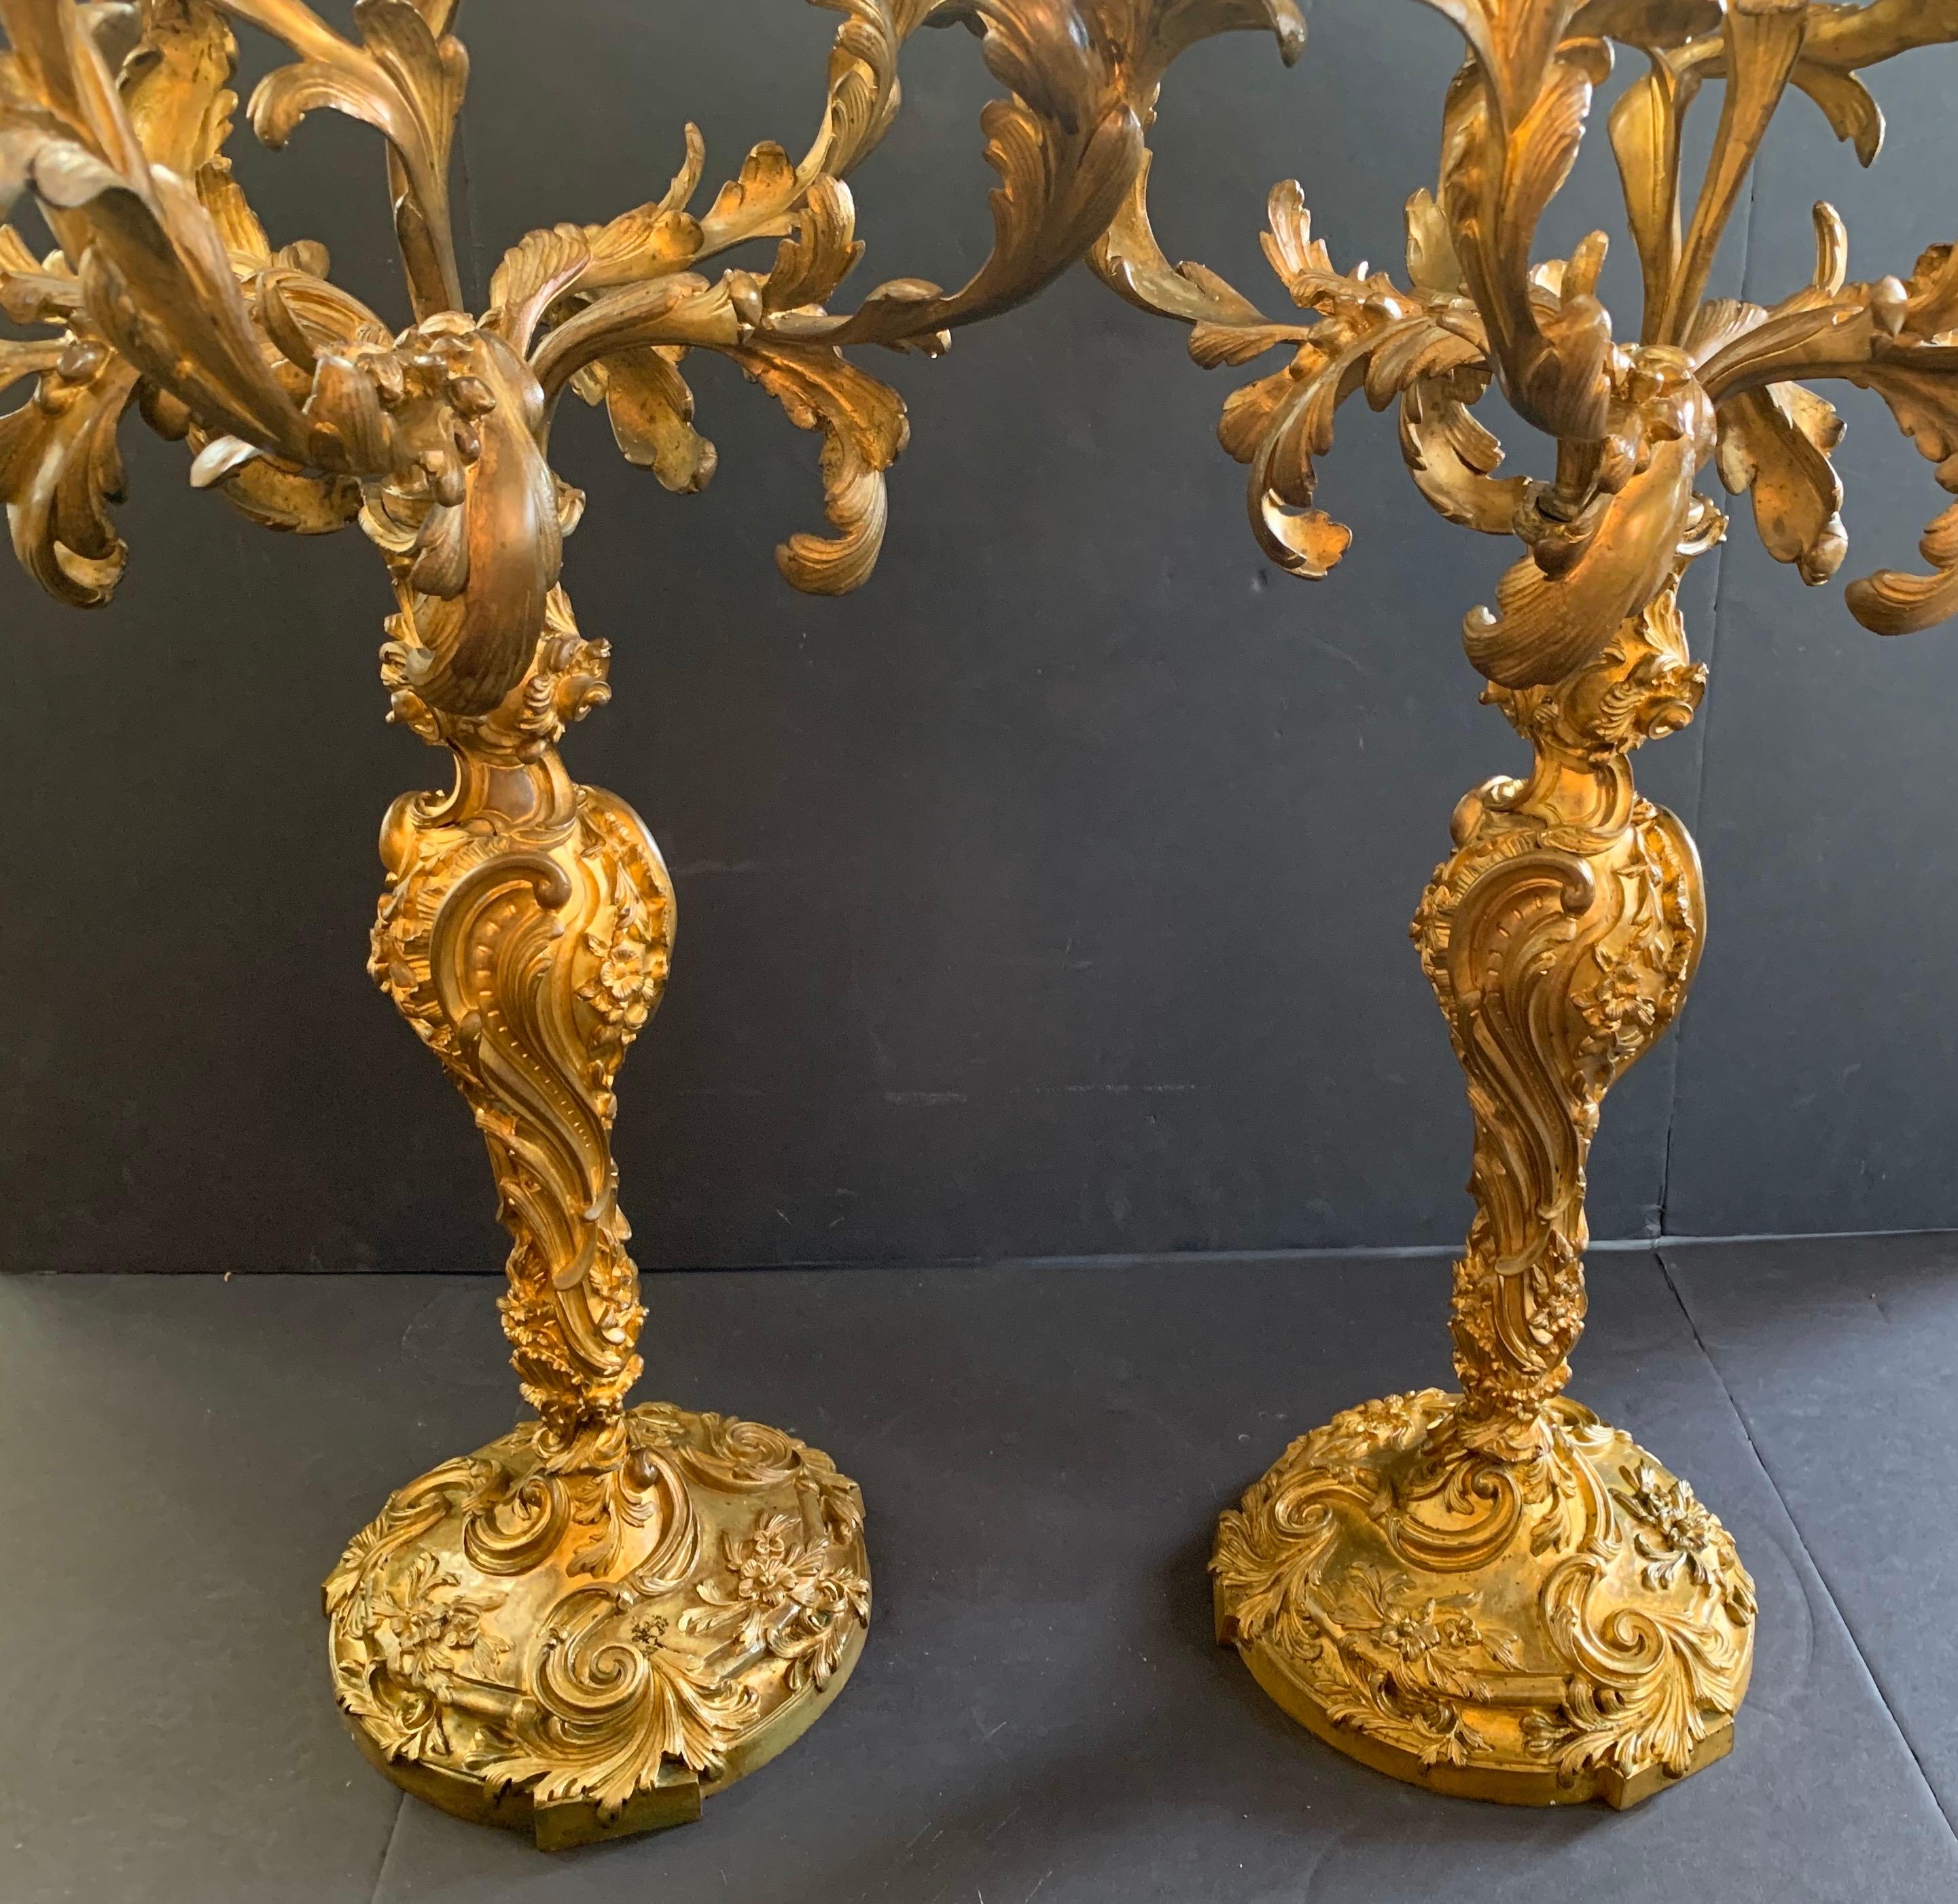 Monumental Rococo Doré Bronze Six-Arm Scrolling Acanthus Leaves Candelabras Pair 5